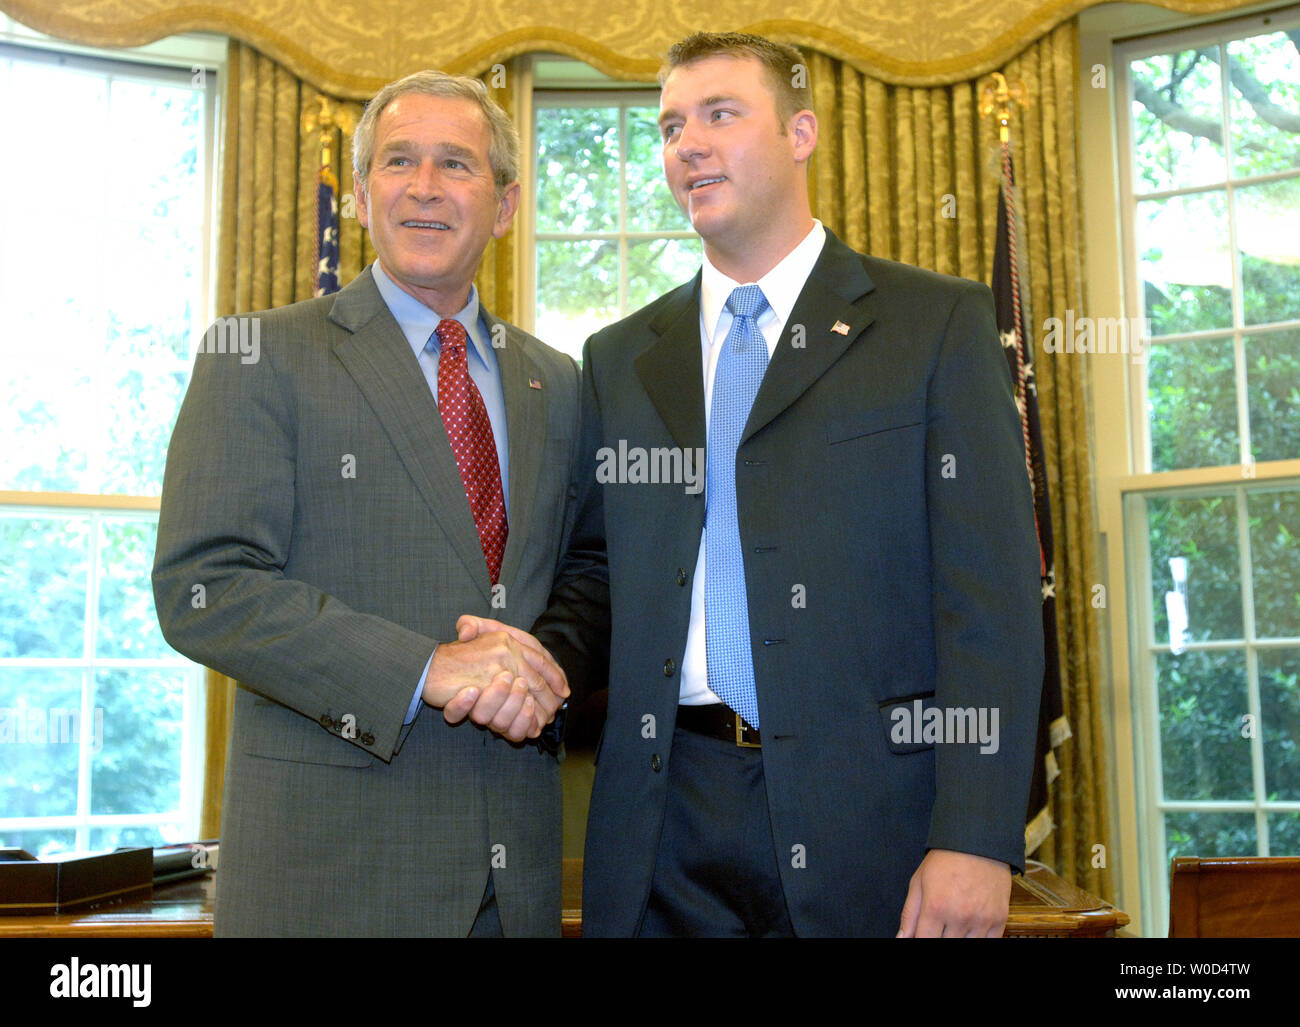 U.S. President George W. Bush shakes hands with Ssgt. Chris Bagge in the  Oval Office of the White House in Washington on June 27, 2006. Bagge was  injured in Iraq. (UPI Photo/Roger